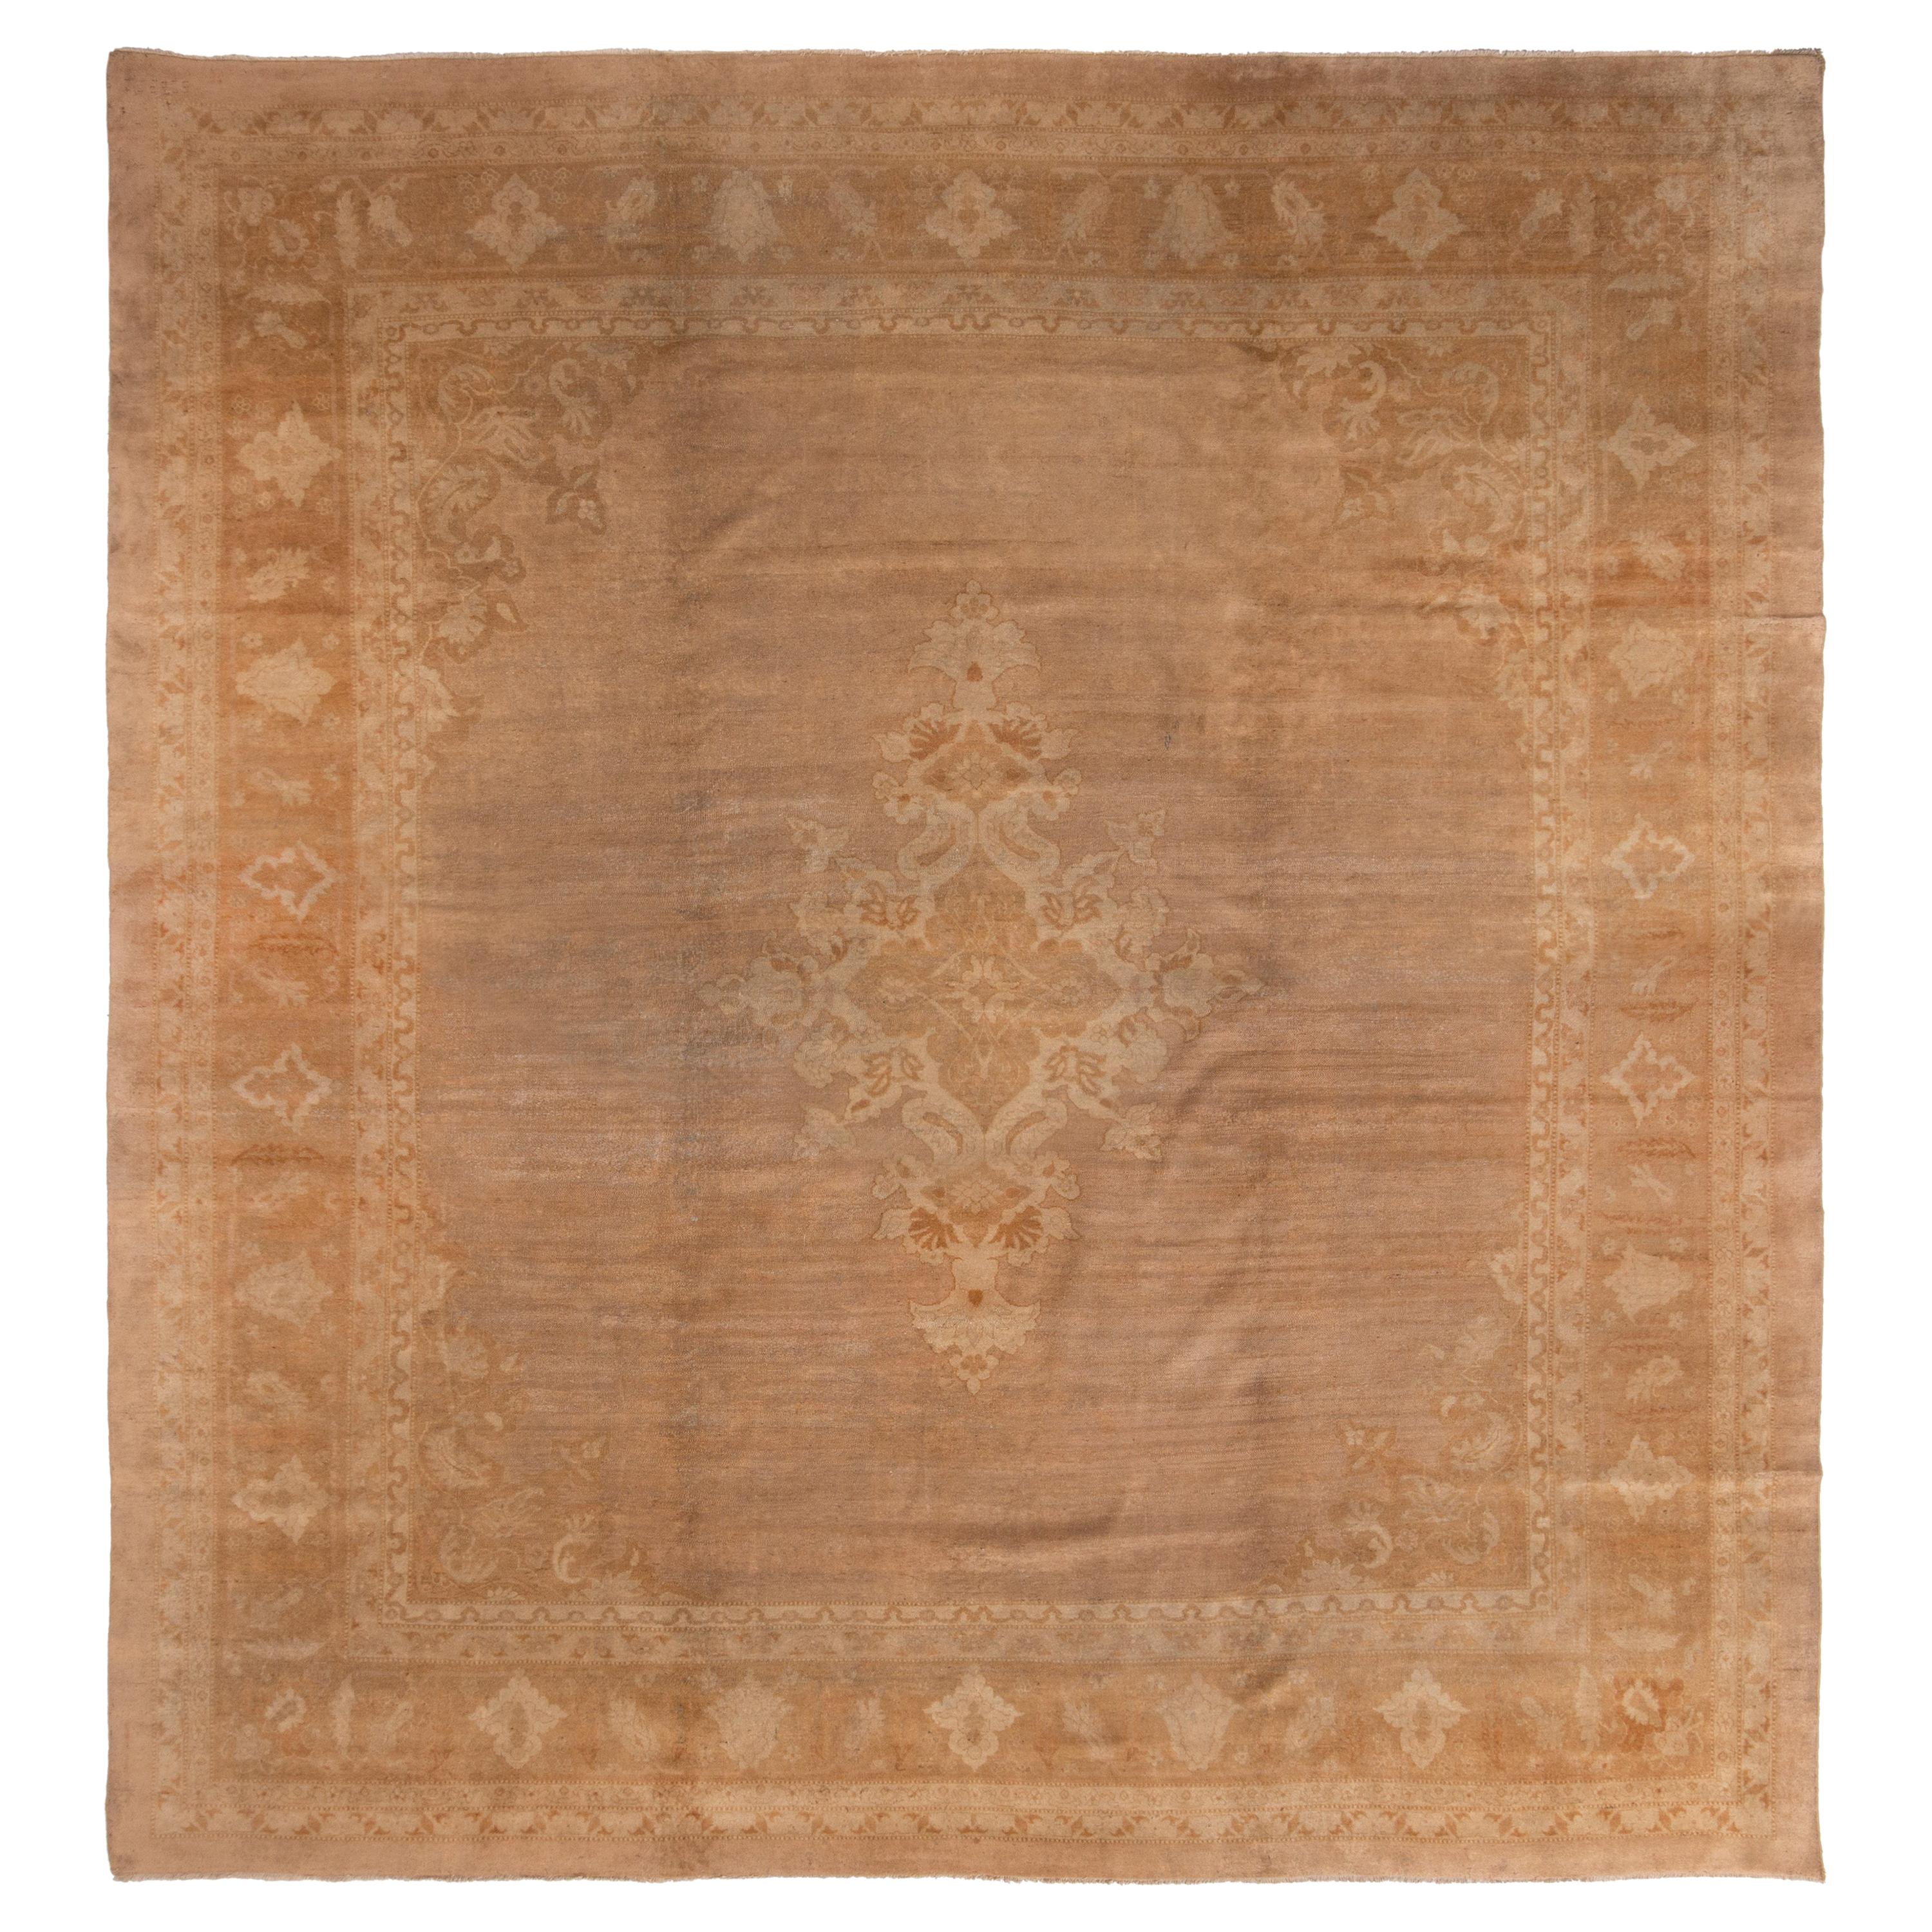 Hand knotted Antique Amritsar Rug in Beige-Brown and Gold Medallion Pattern